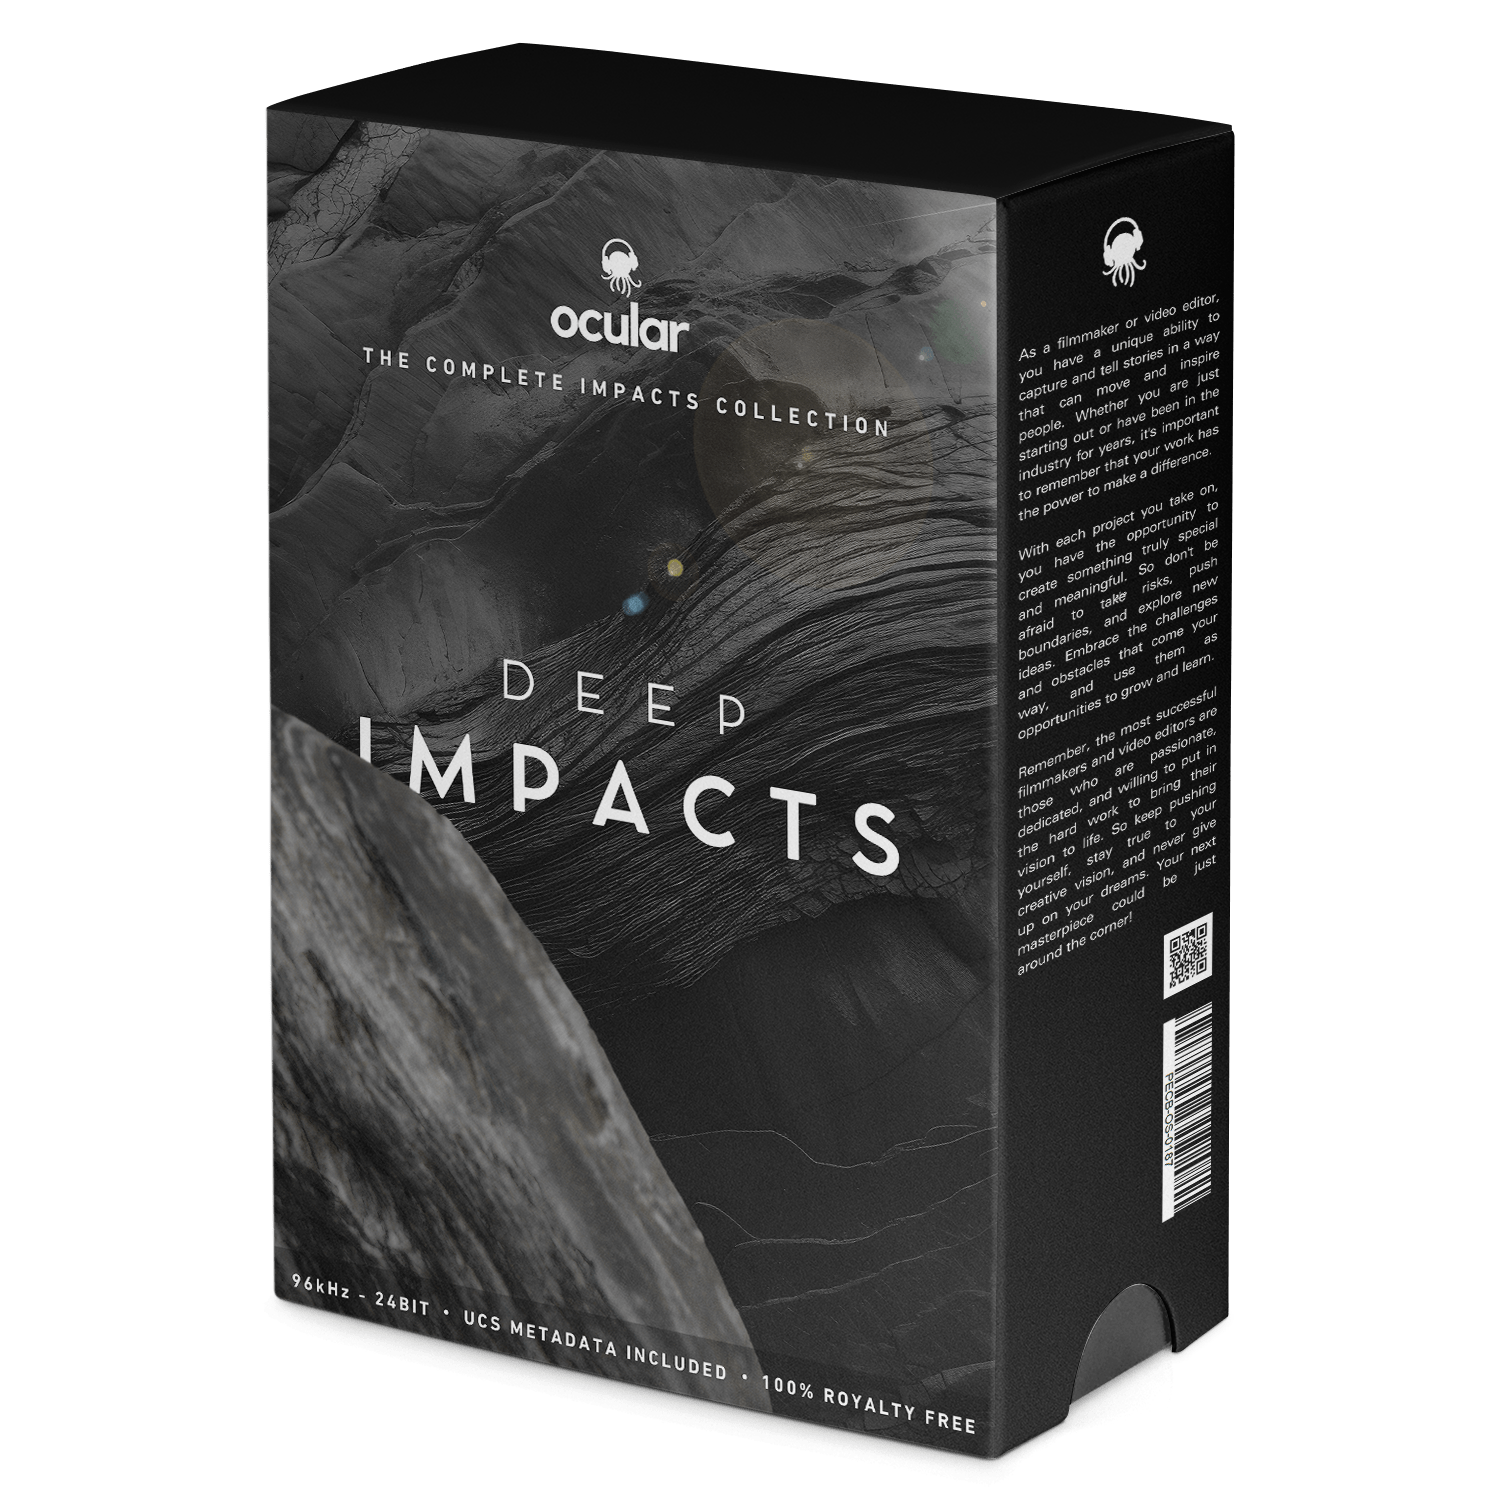 Deep Impacts Sound FX for video editing.